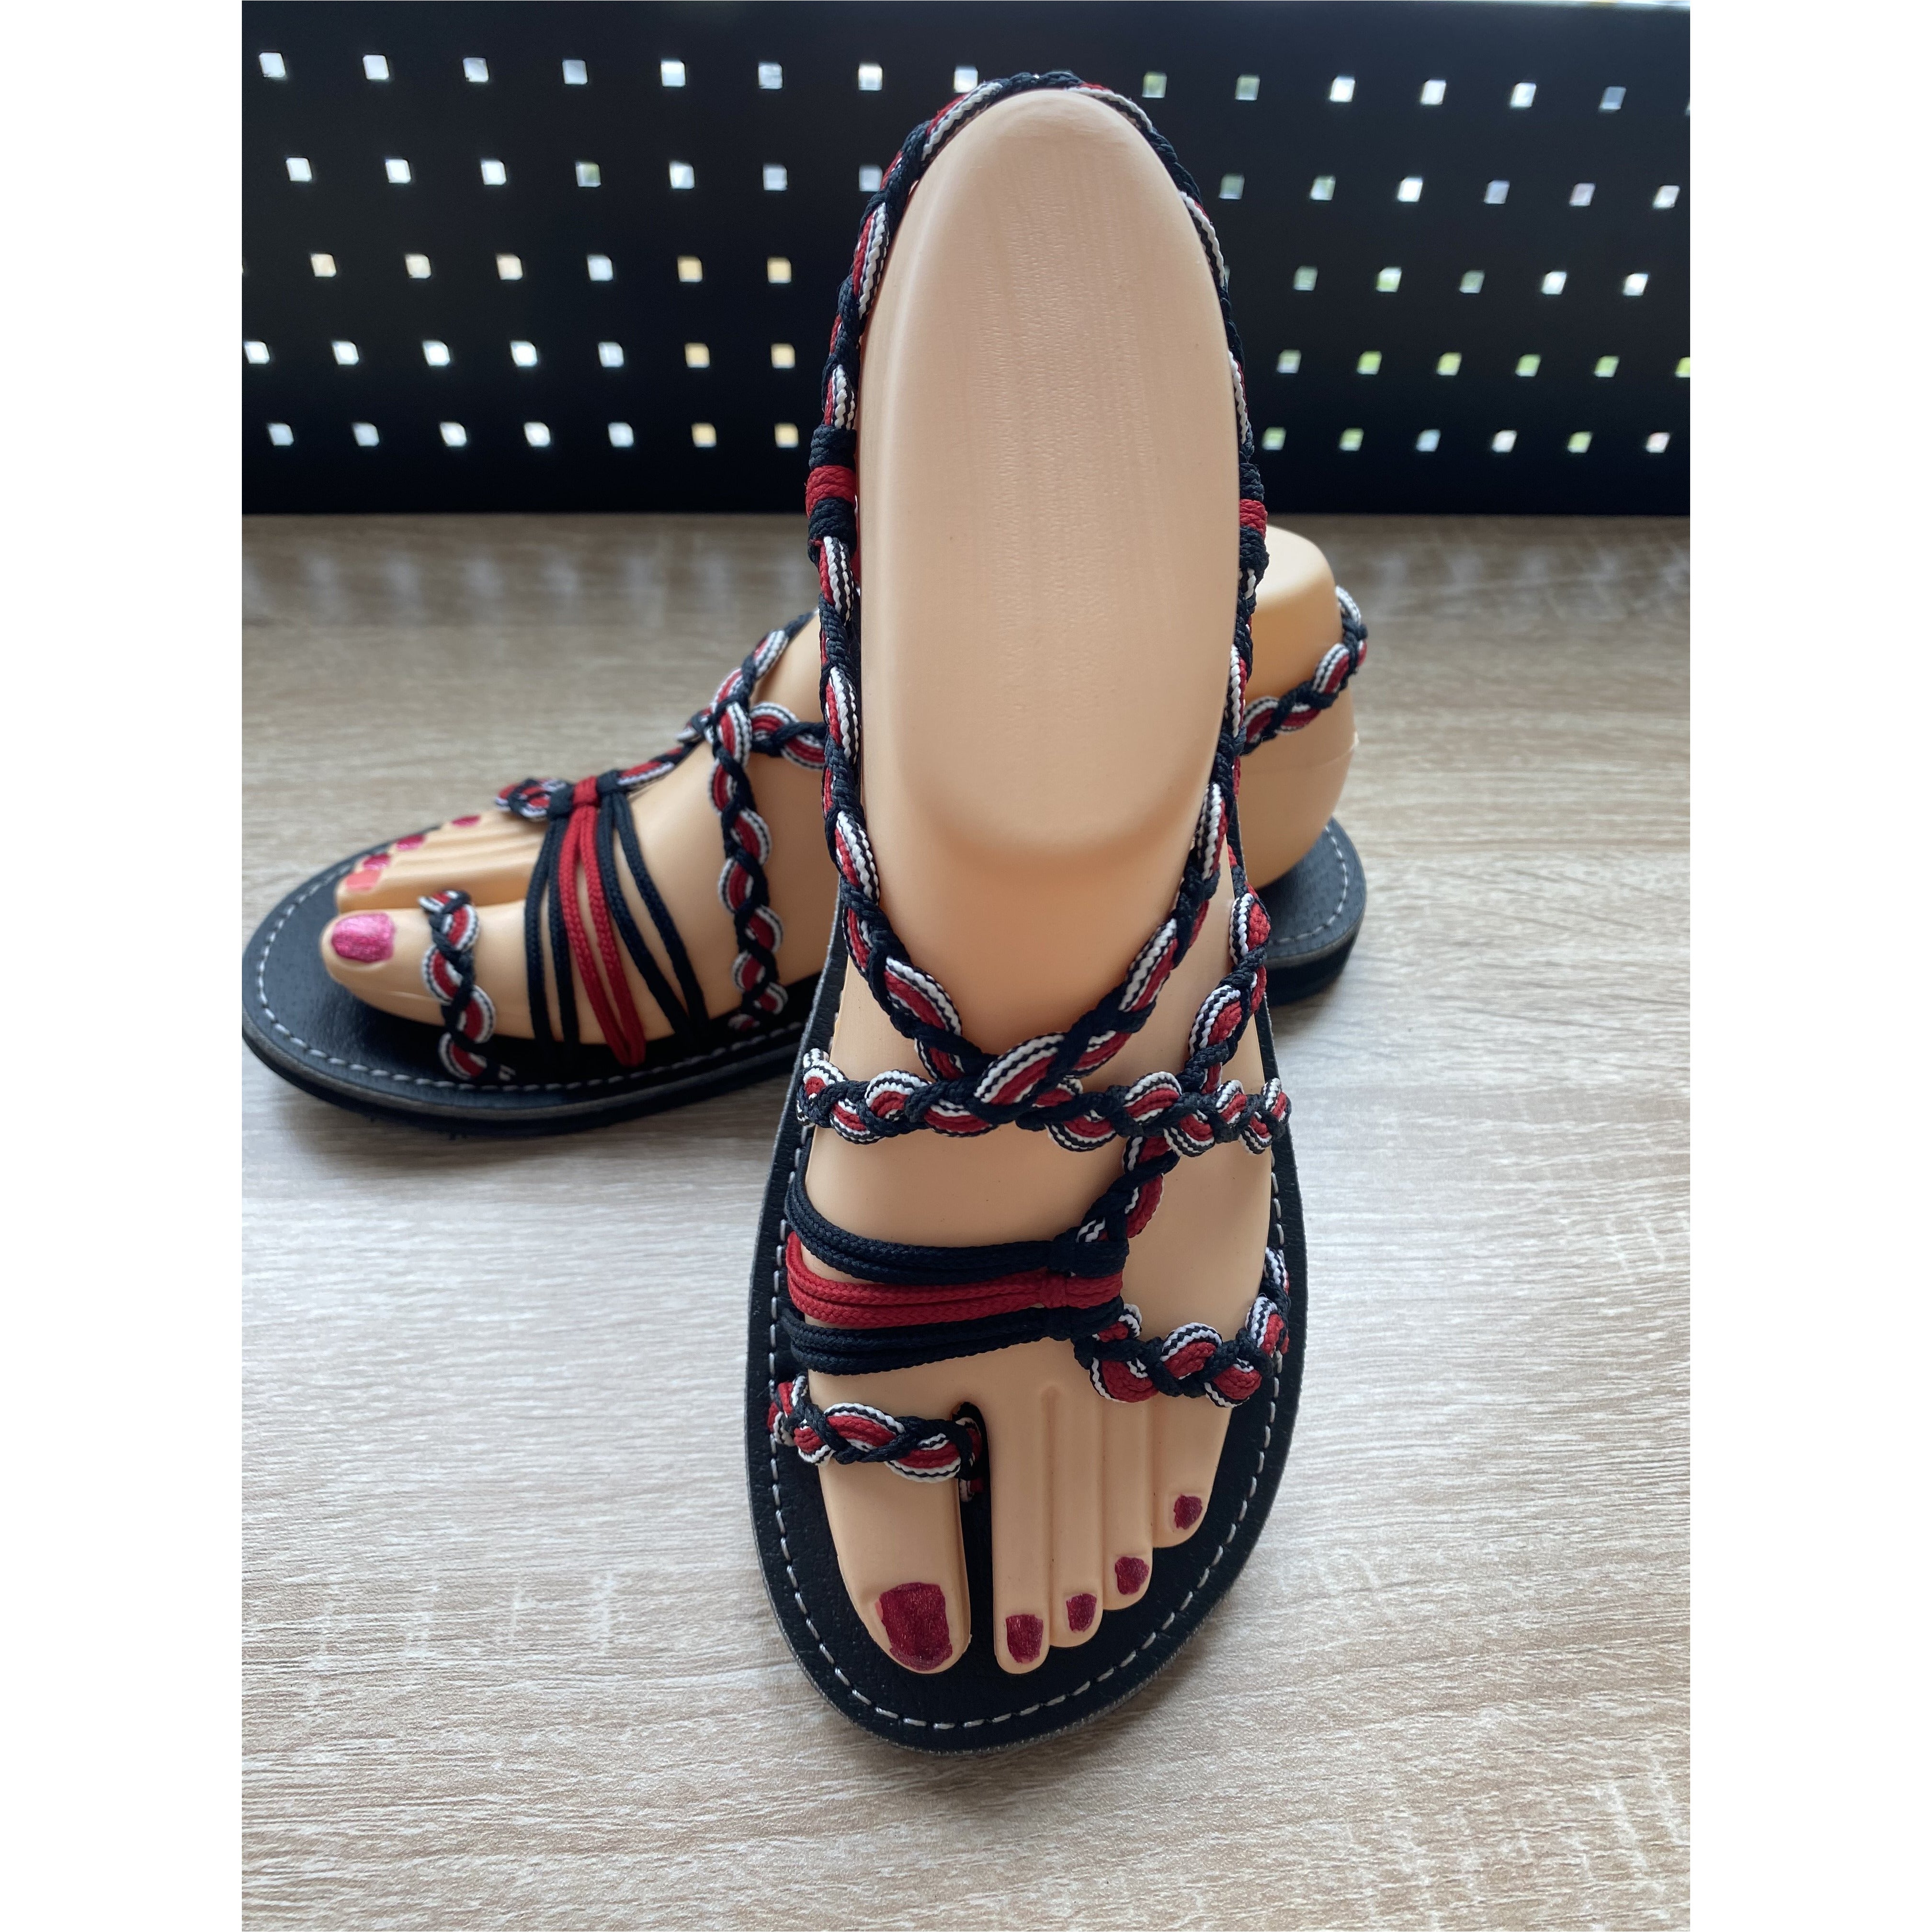 Shoes - Braided Sandals BRW